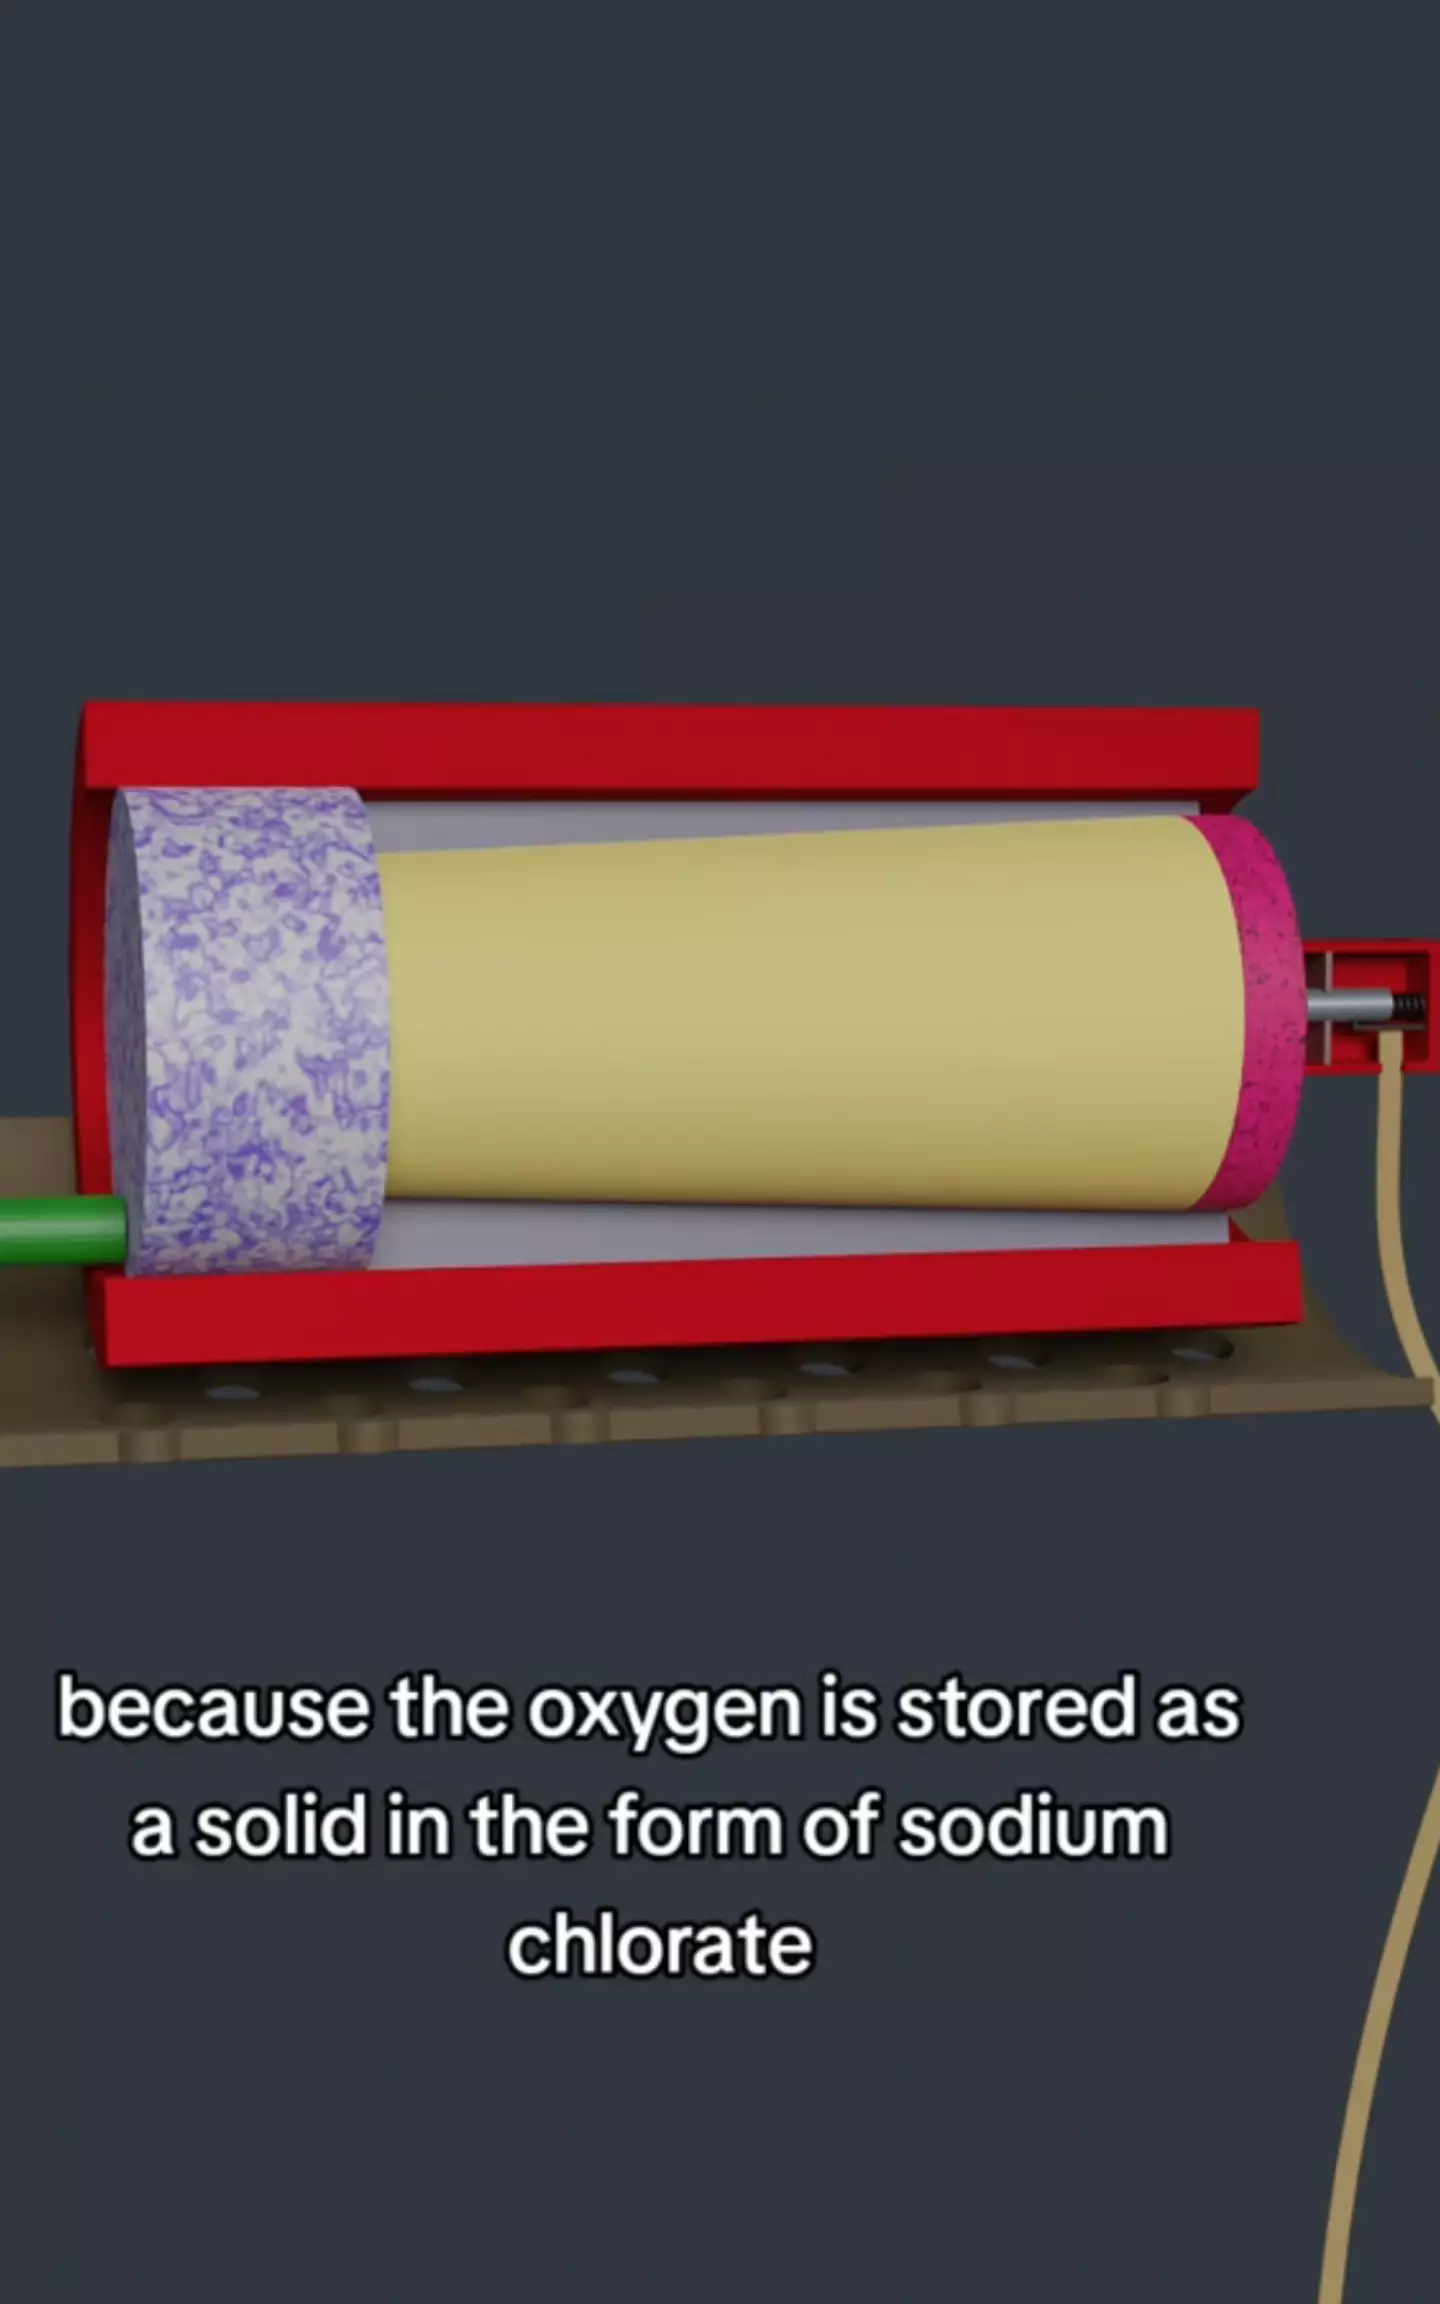 The oxygen is stored solidly on board the plane. (